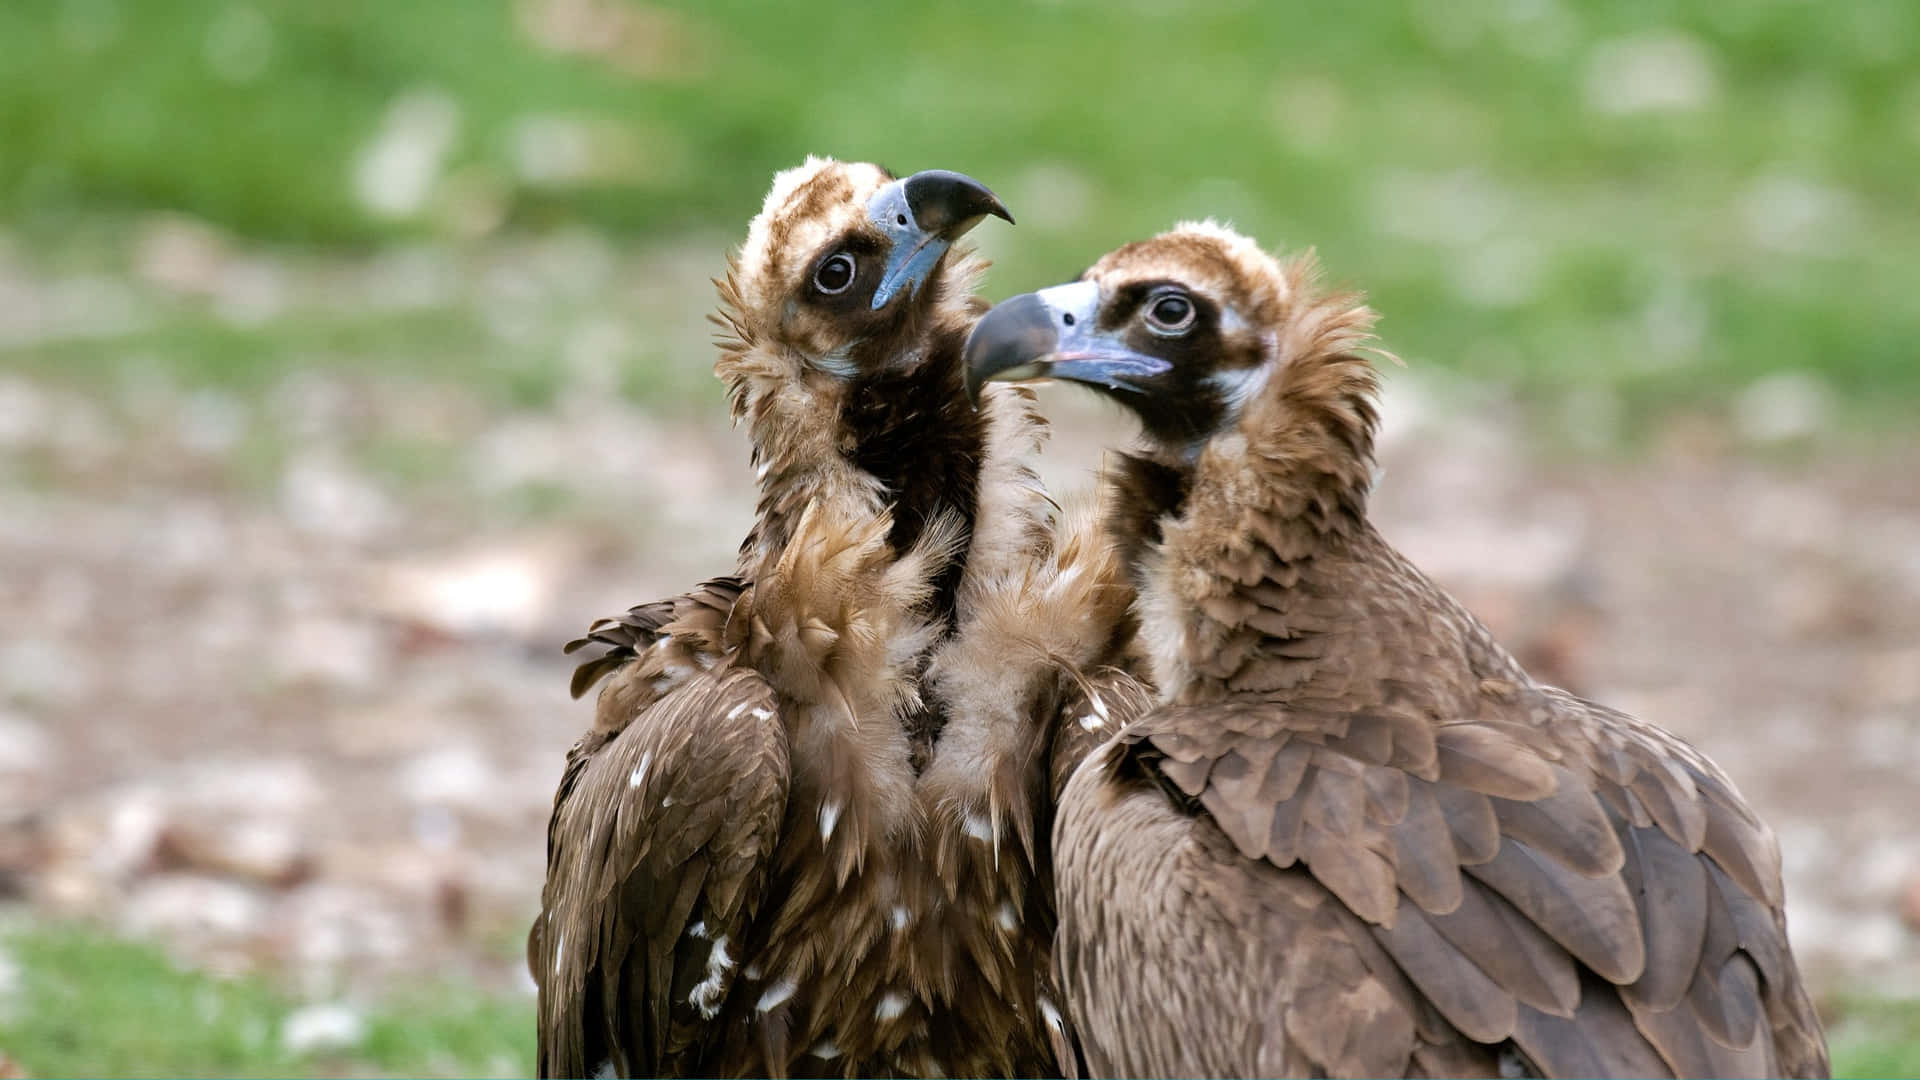 Two Vultures Intimate Moment Wallpaper